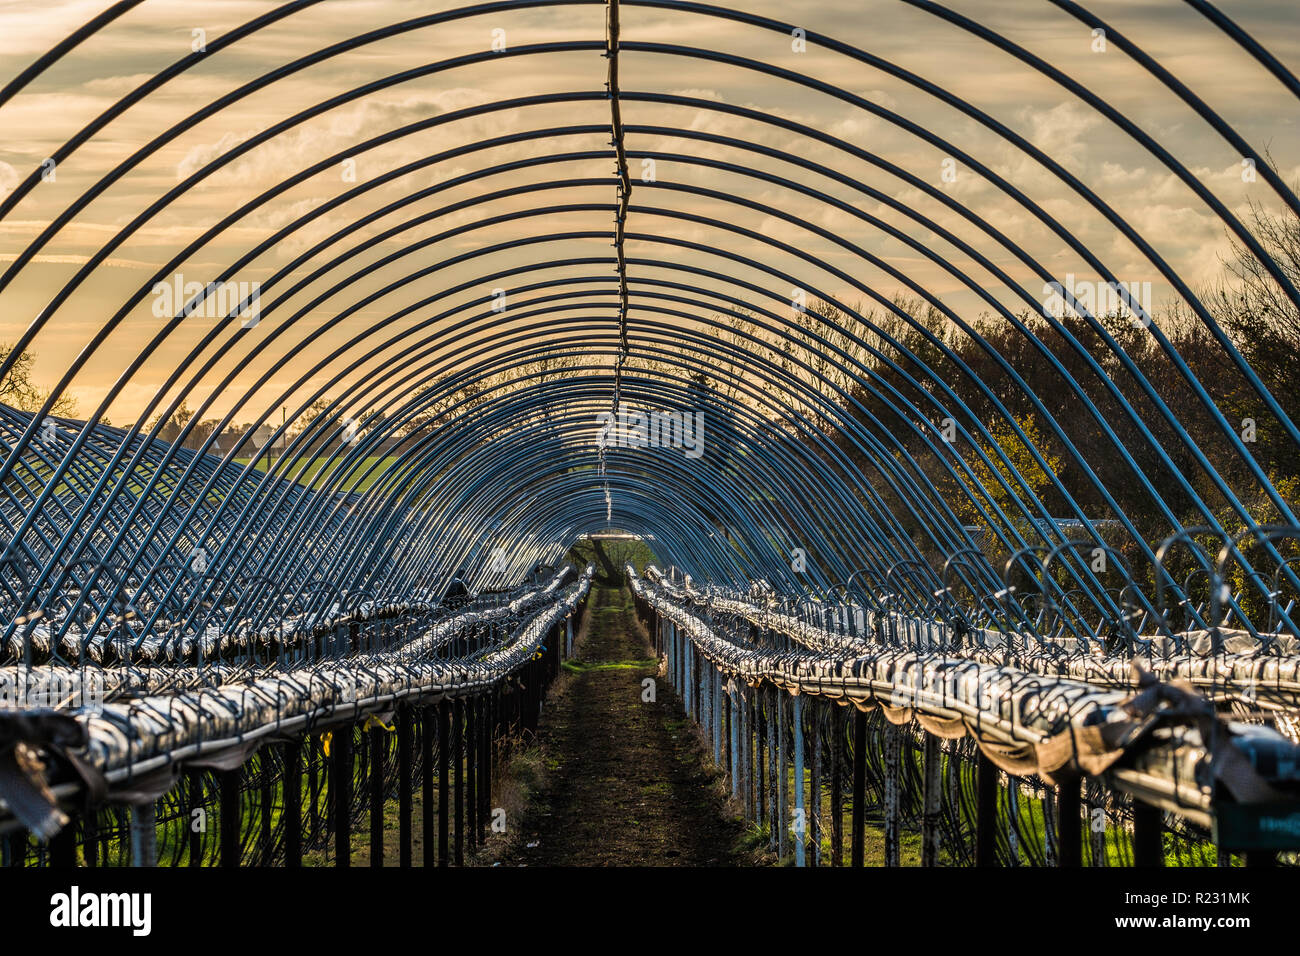 Strawberry growers polytunnels out of season with the covers removed to protect them from bad weather. Stock Photo